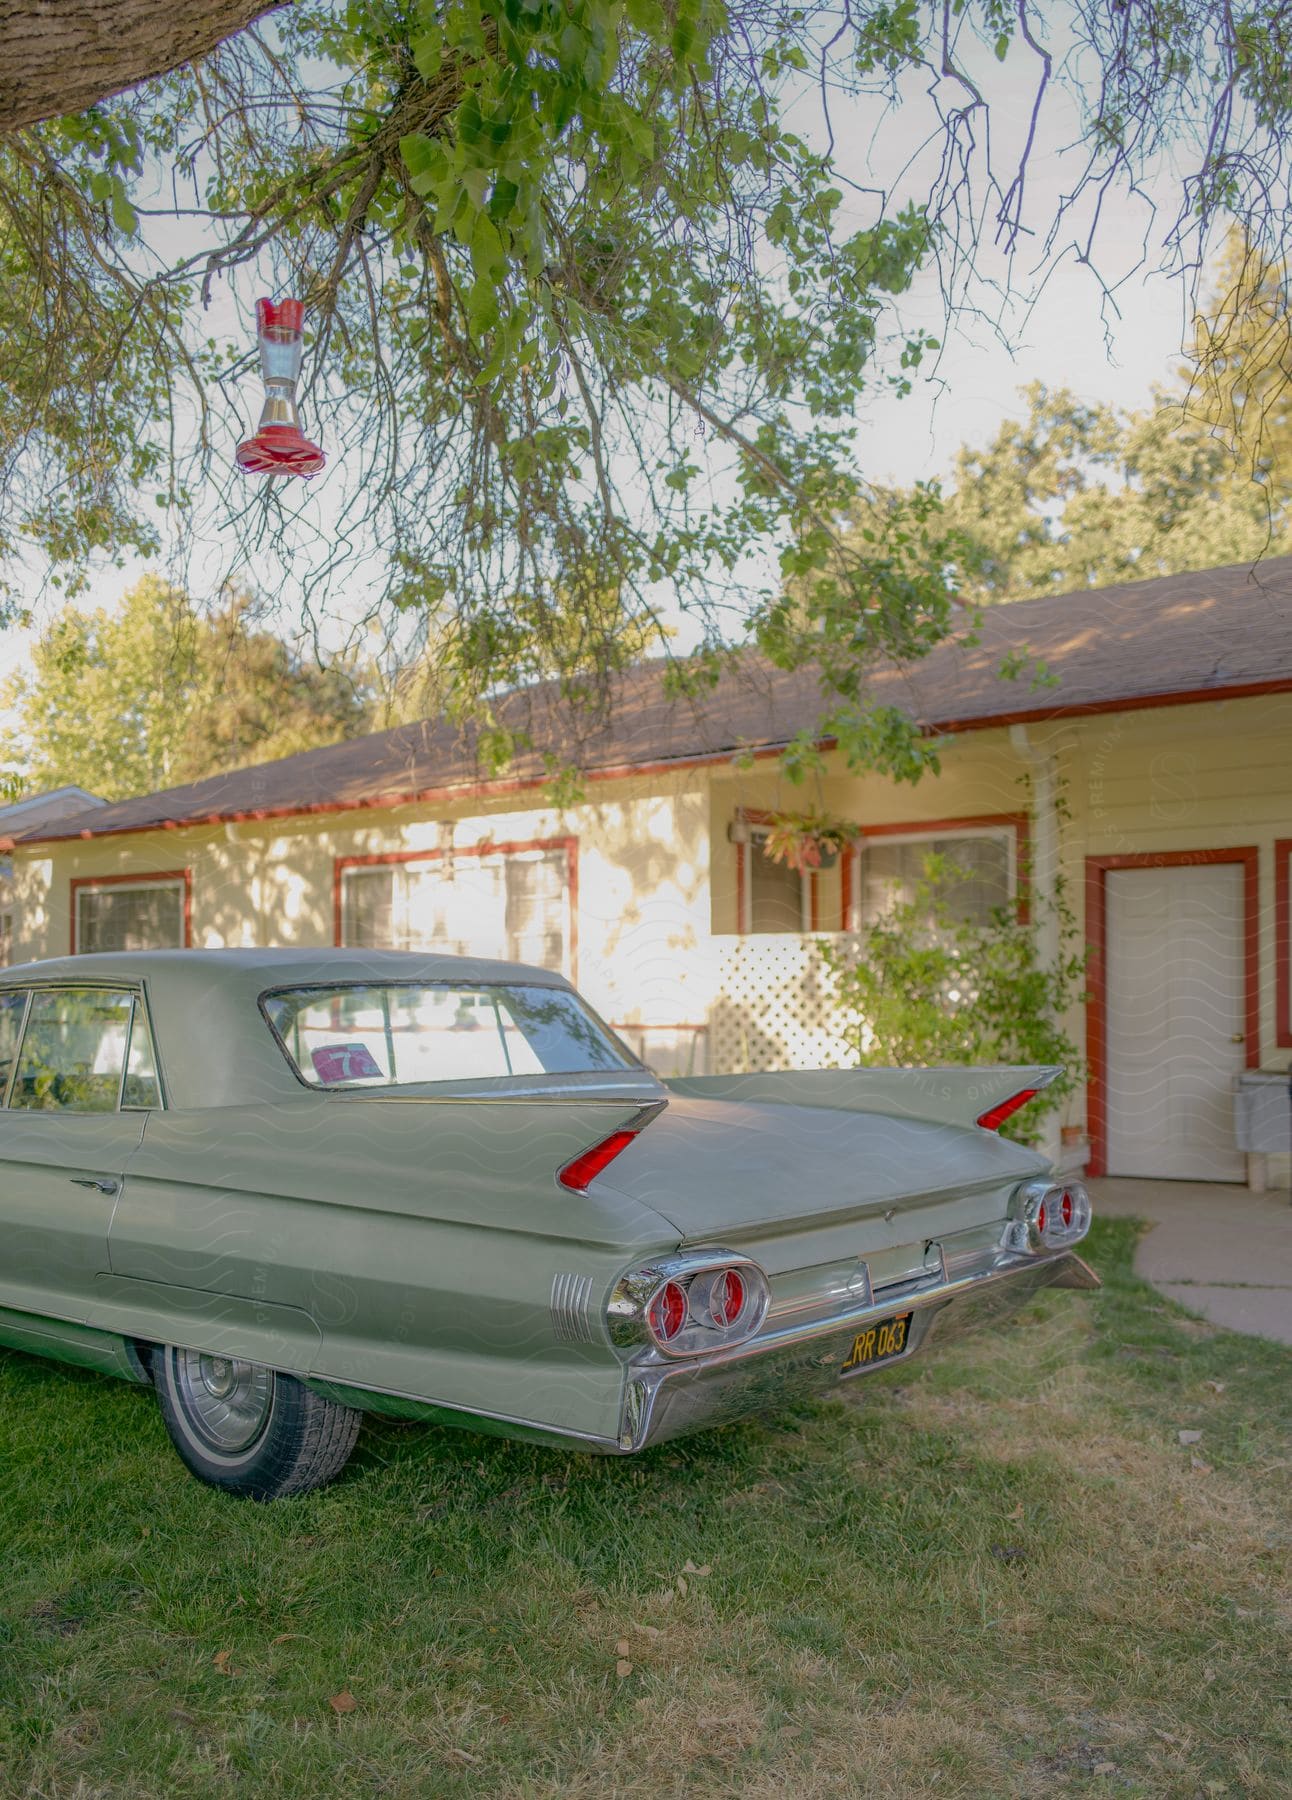 A classic 1960s Cadillac deVille Town Sedan rests under a shady tree, its bird feeder swaying gently in the breeze.